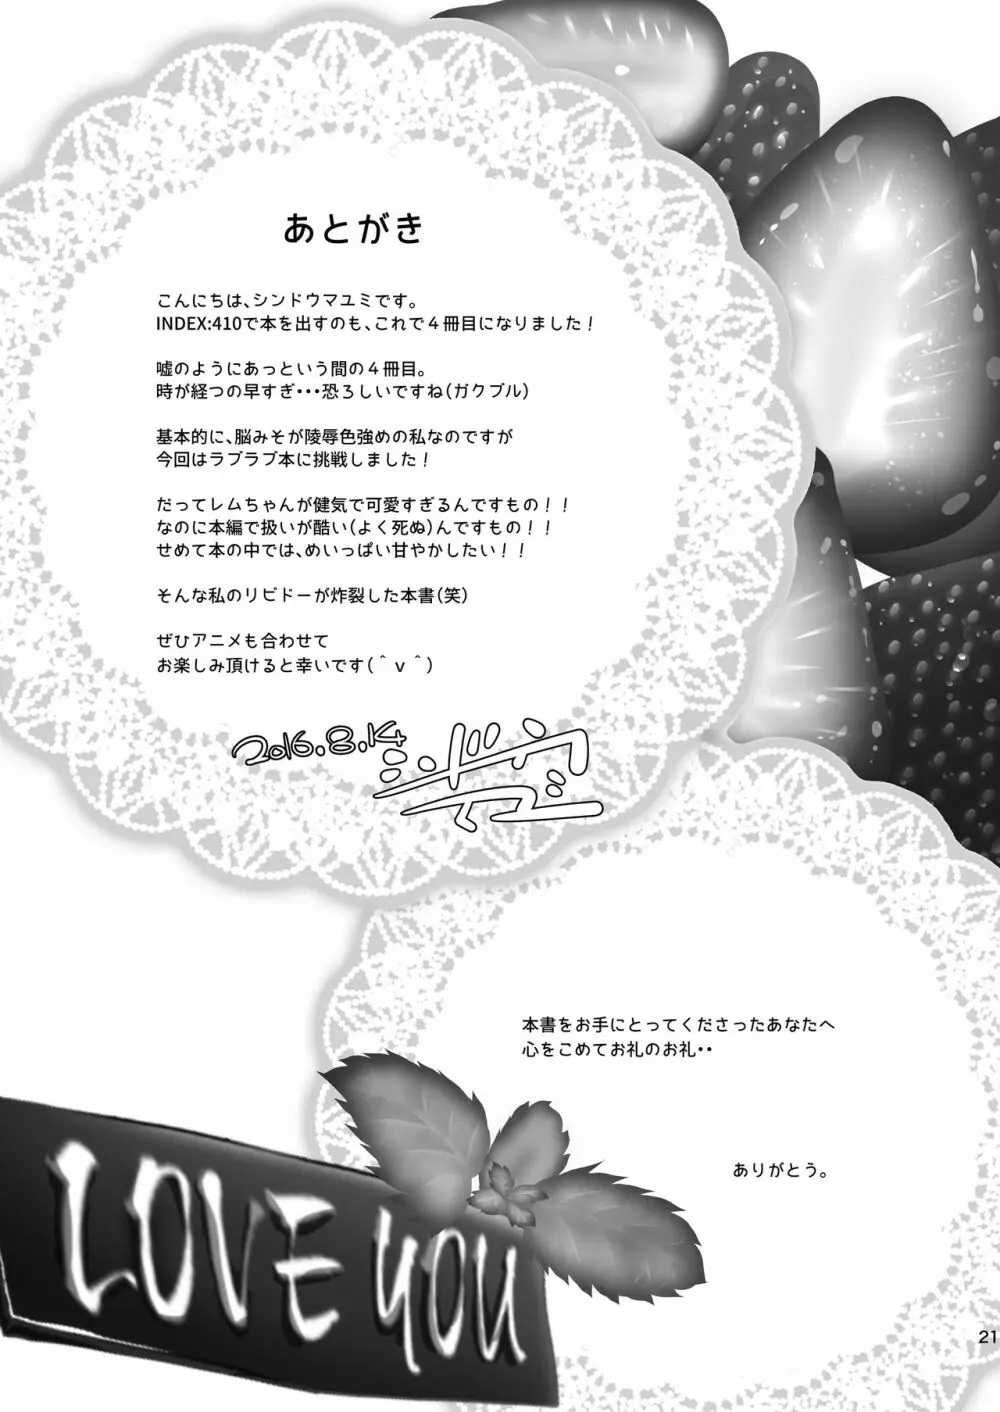 Re:レムから始めるお礼のお礼 - page23